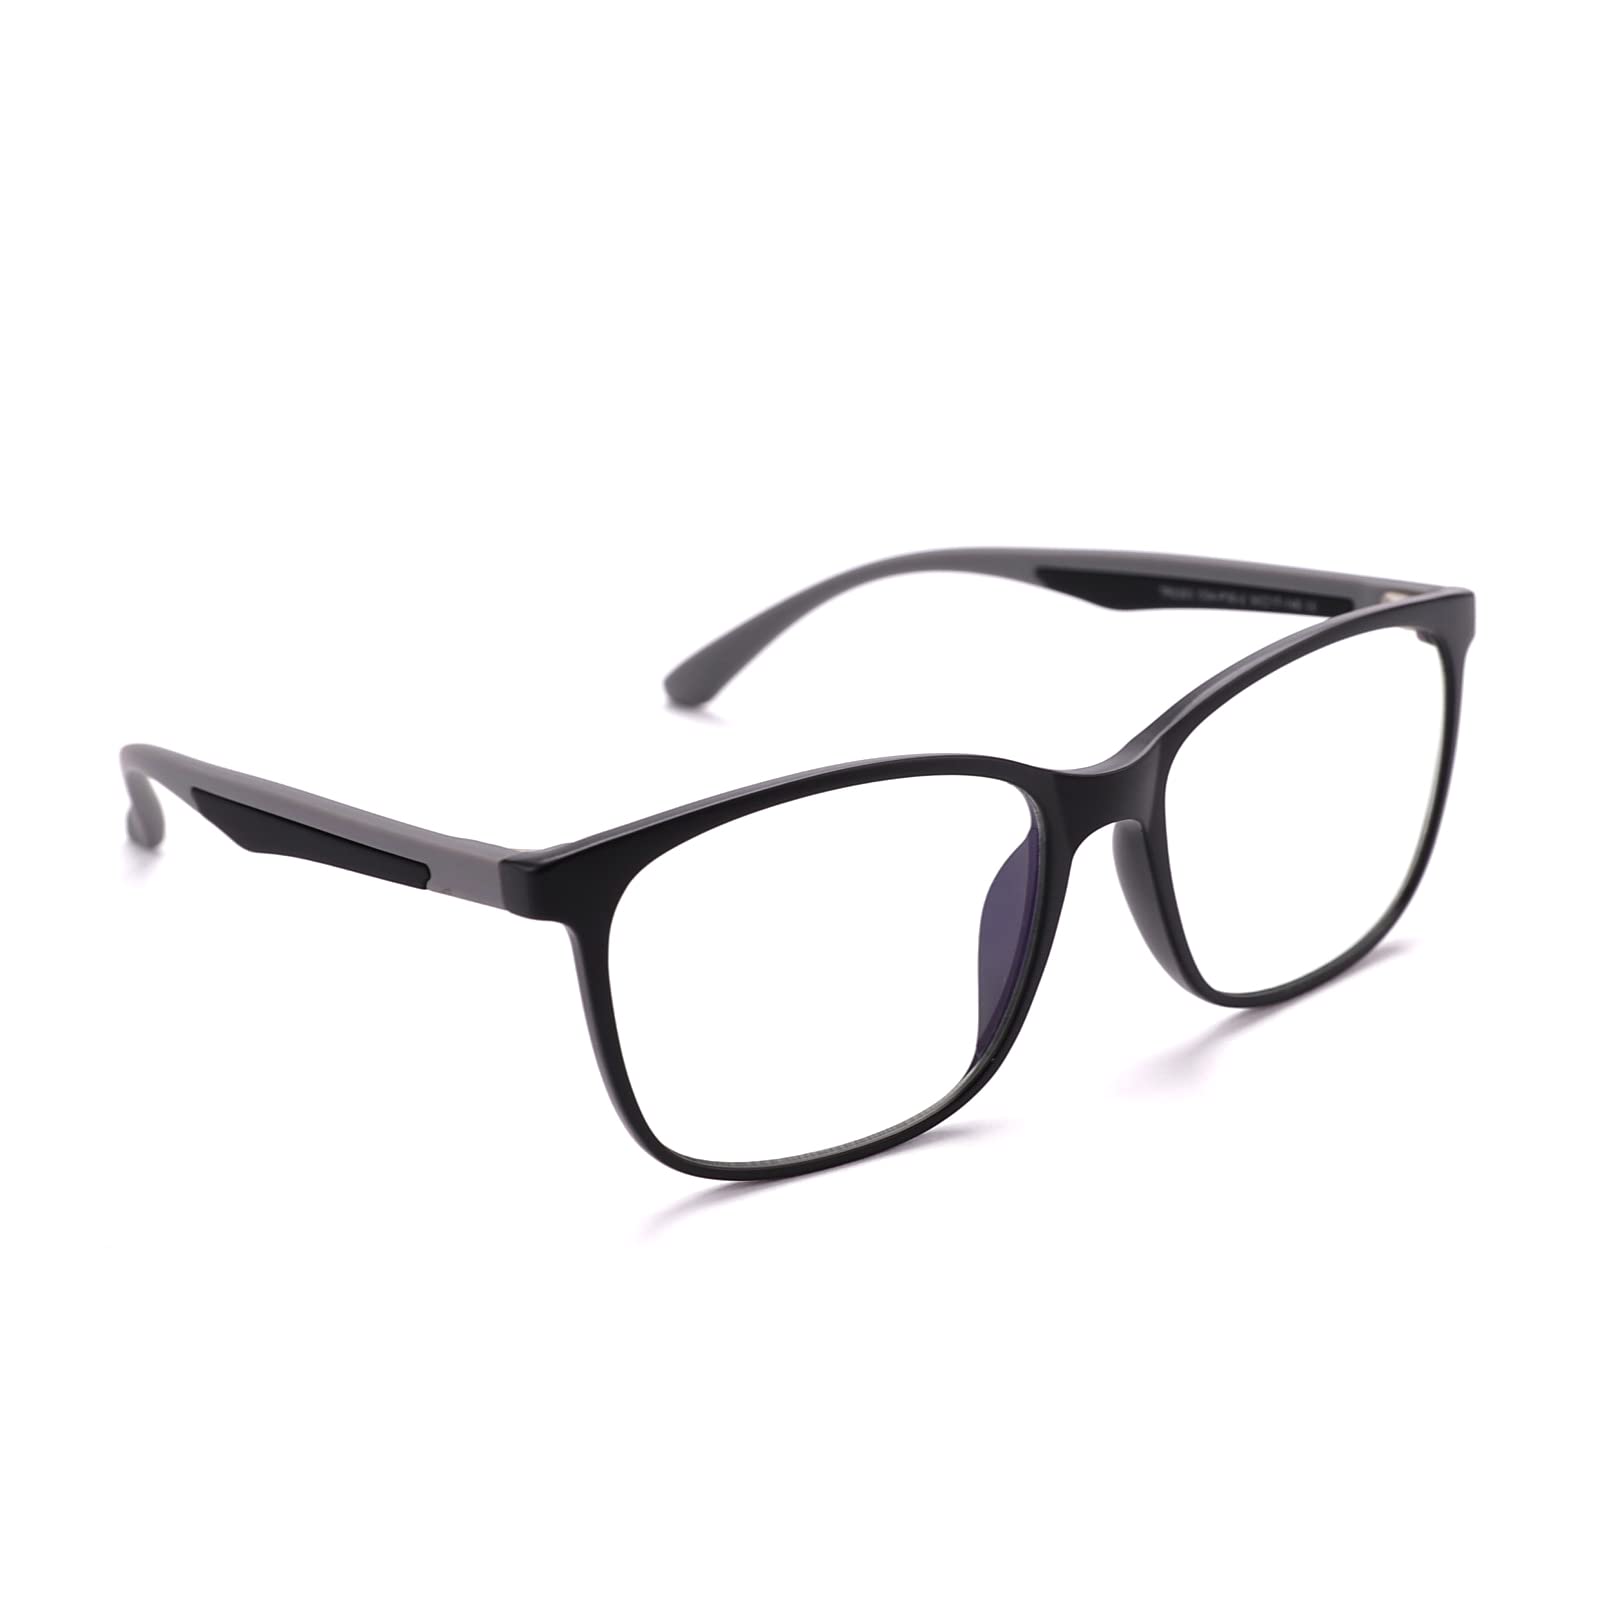 Intellilens Square Blue Cut Computer Glasses for Eye Protection